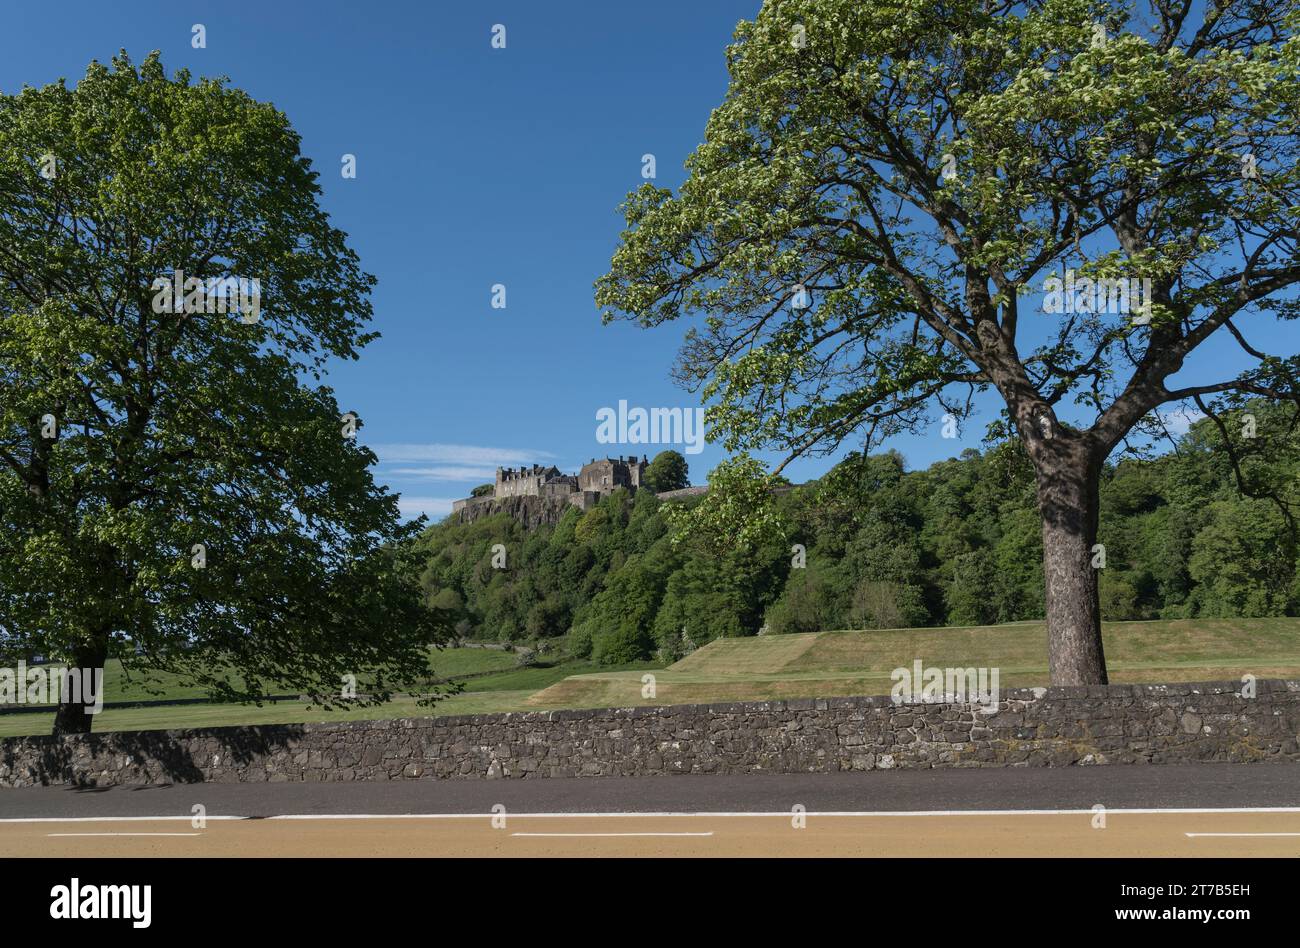 Landscape and view of Stirling castle. Stock Photo